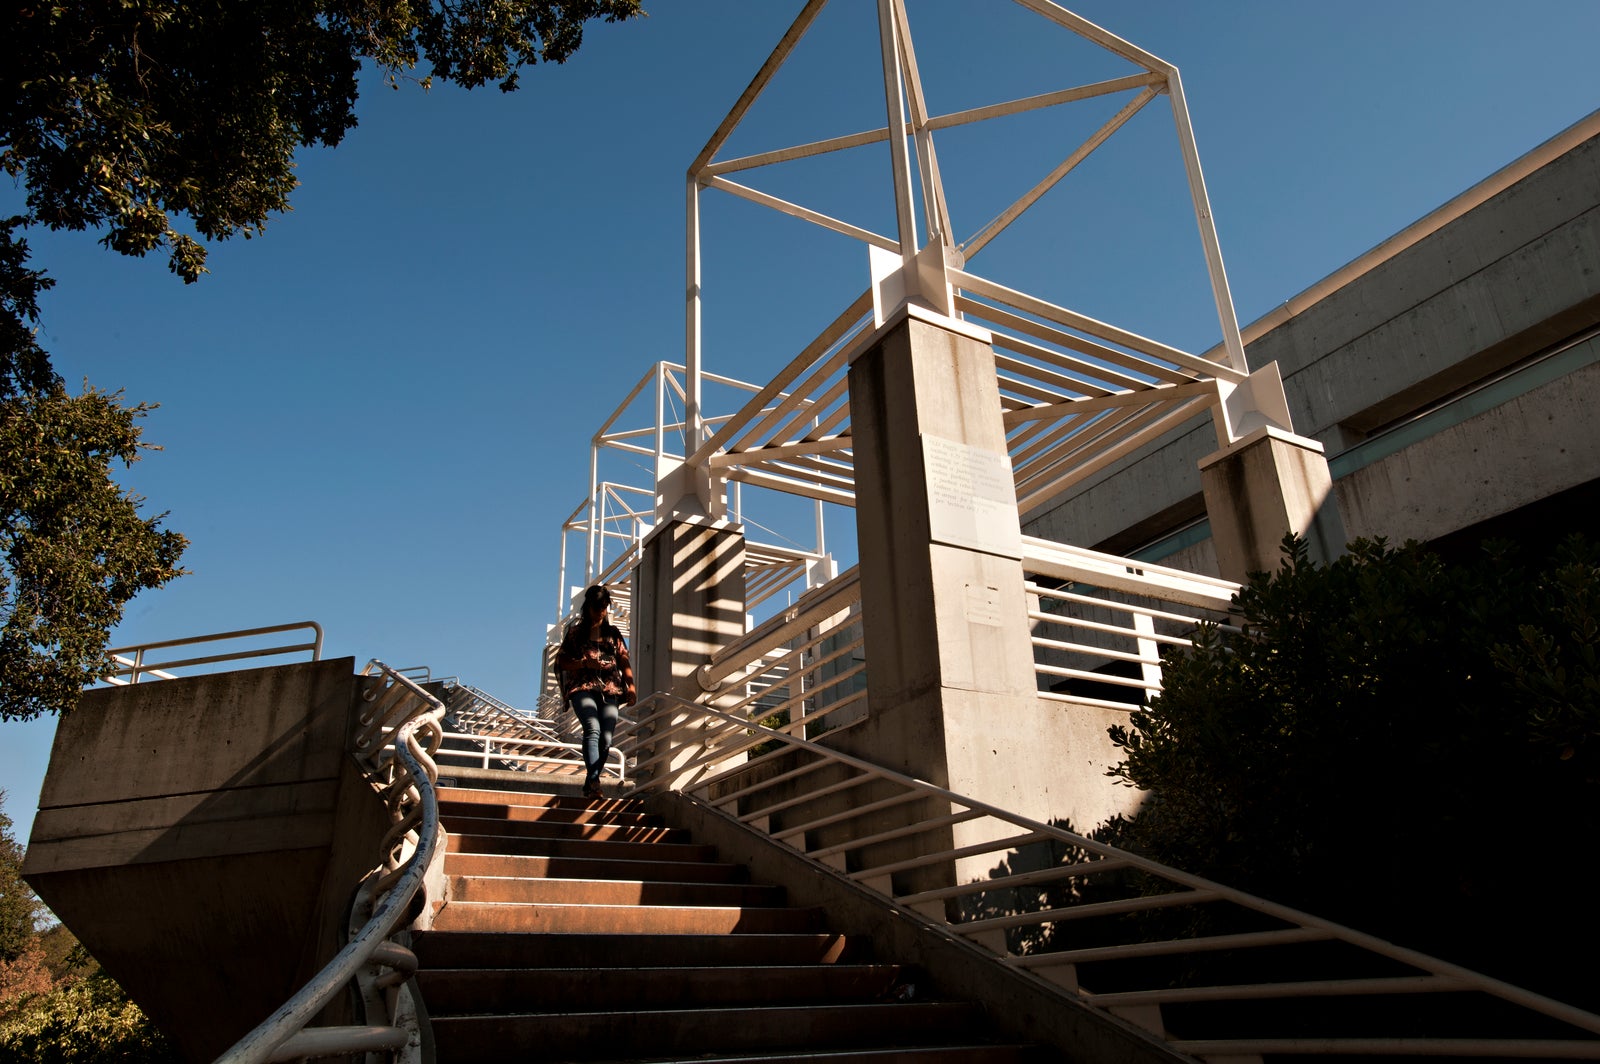 A woman walks down a staircase outside a parking structure.